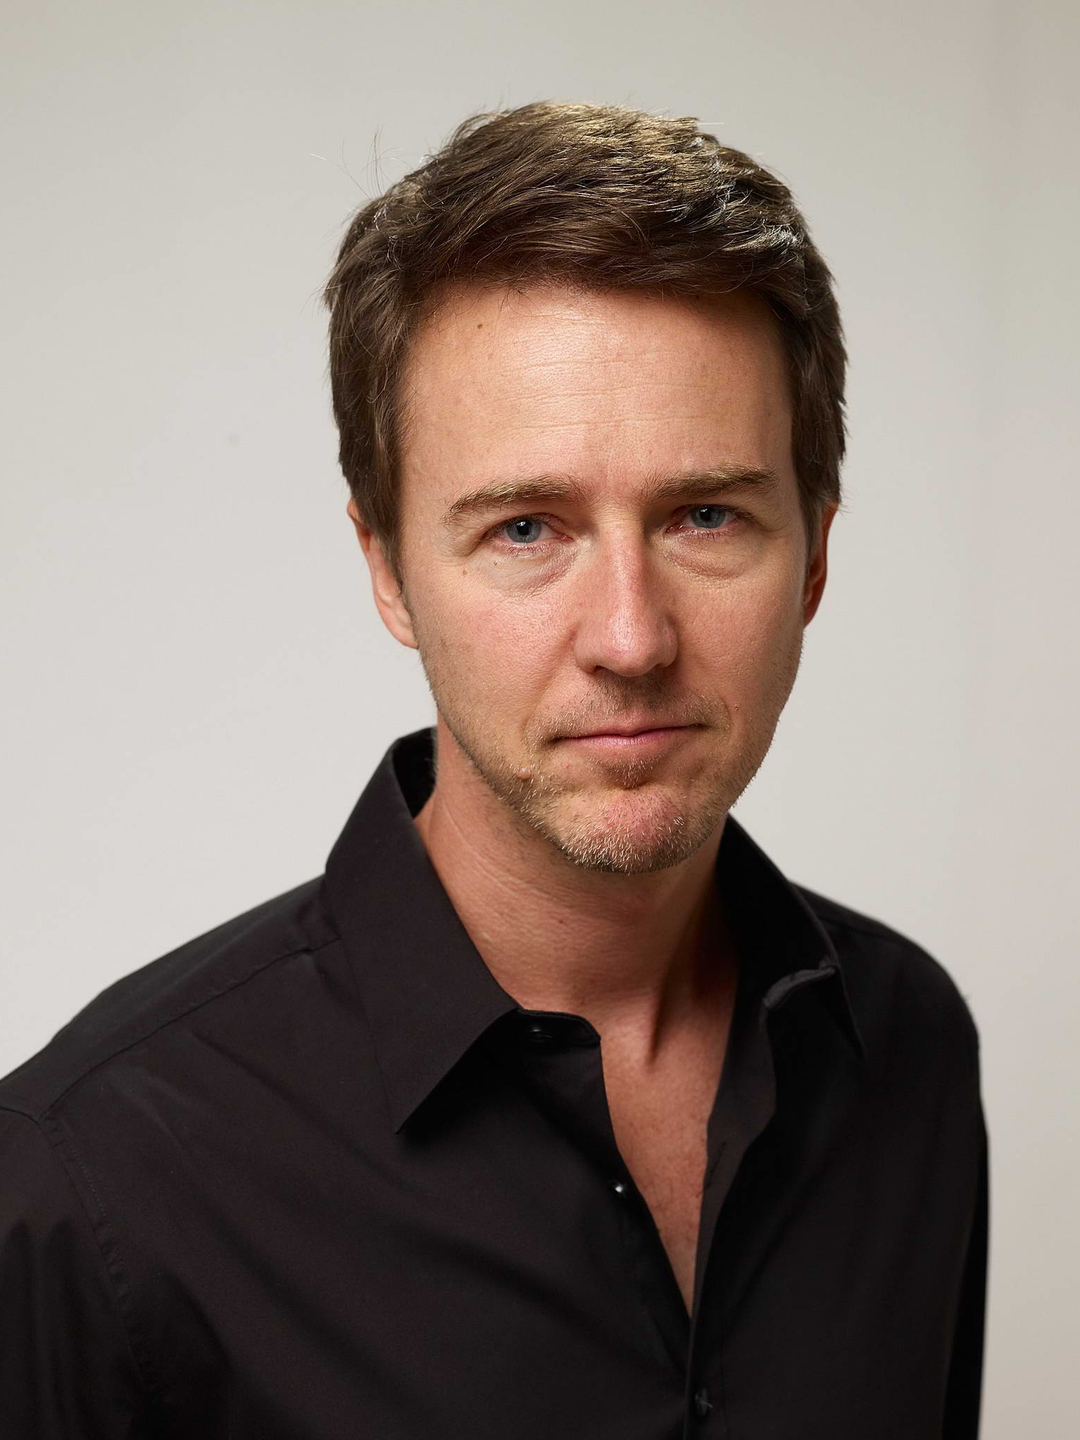 Edward Norton who is he